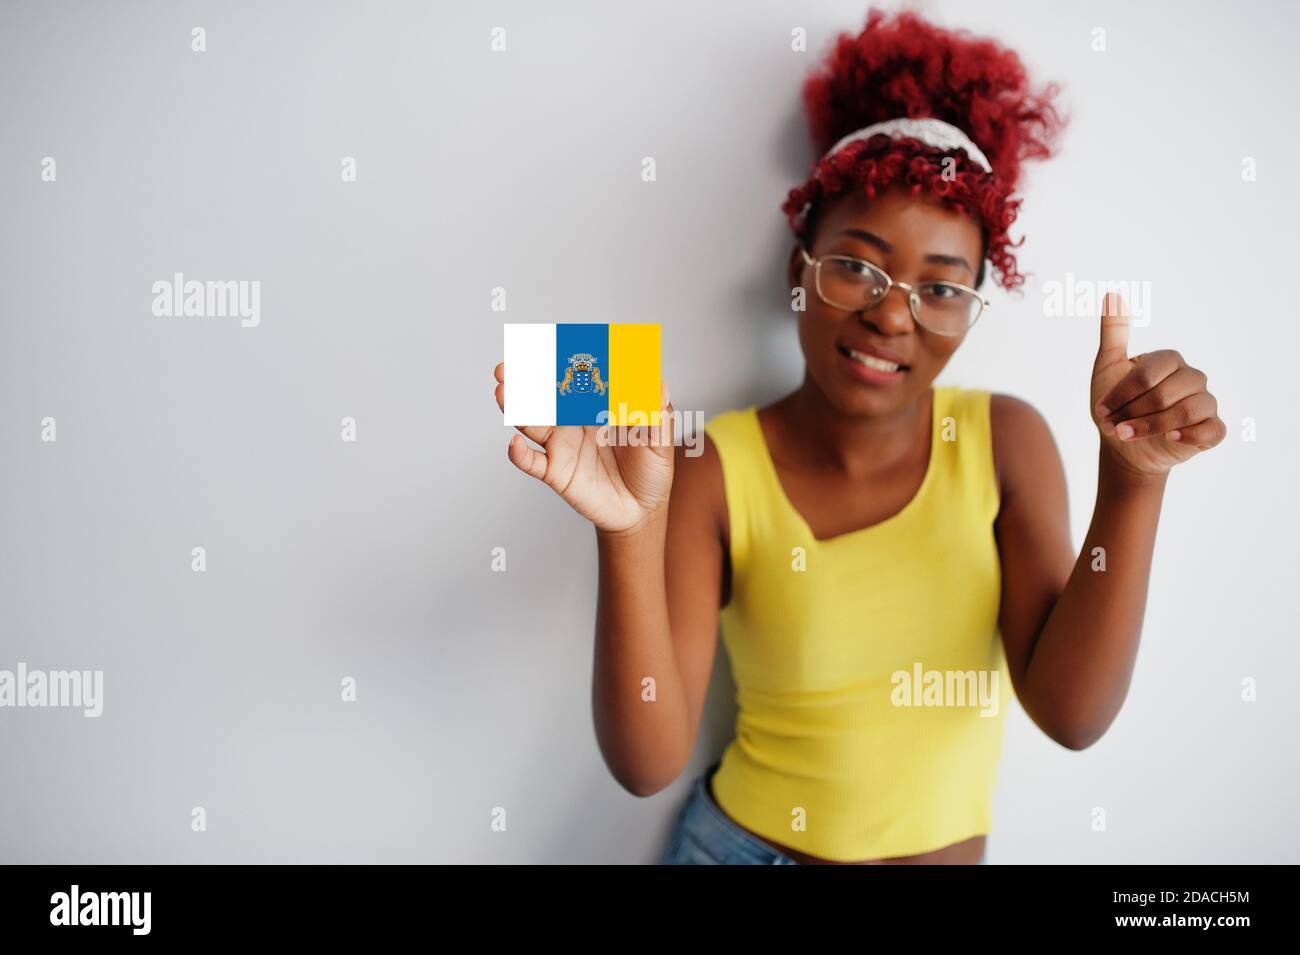 African woman with afro hair, wear yellow singlet and eyeglasses, hold Canary Islands flag isolated on white background, show thumb up. Stock Photo